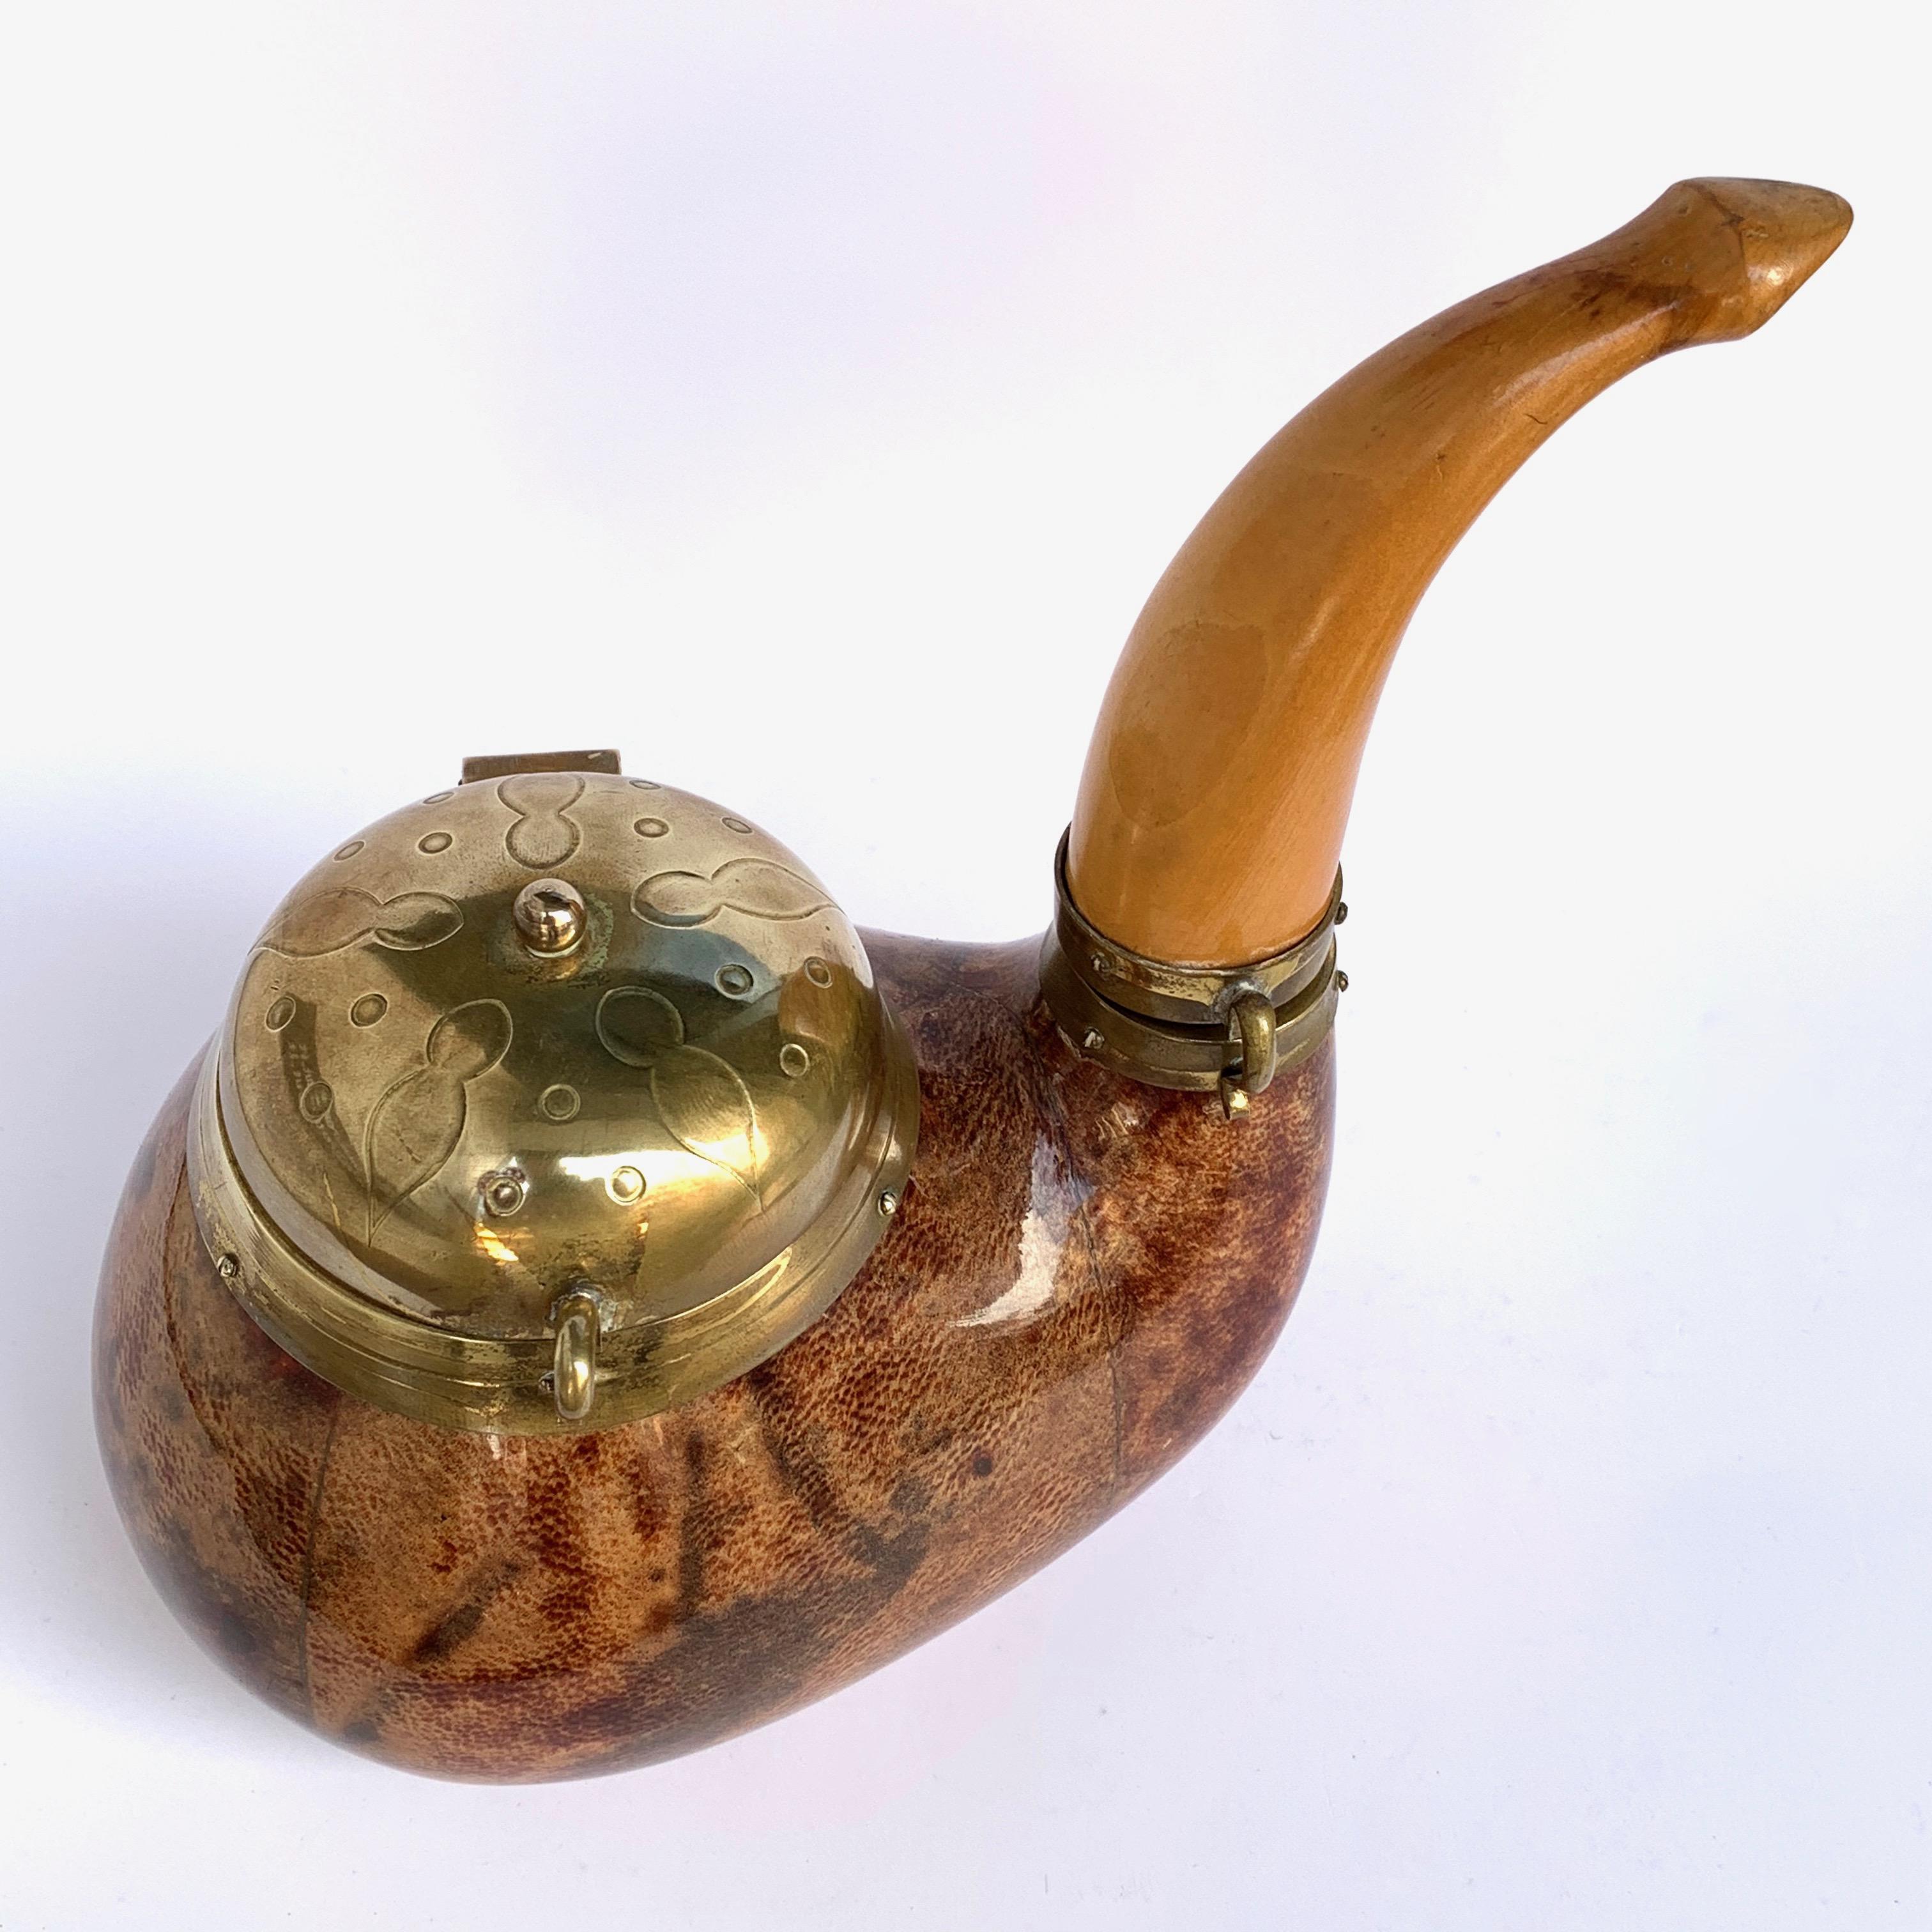 Italy 1940s Aldo Tura Goat Skin, Brass and Wood Tobacco Container, Pipe Shape For Sale 3